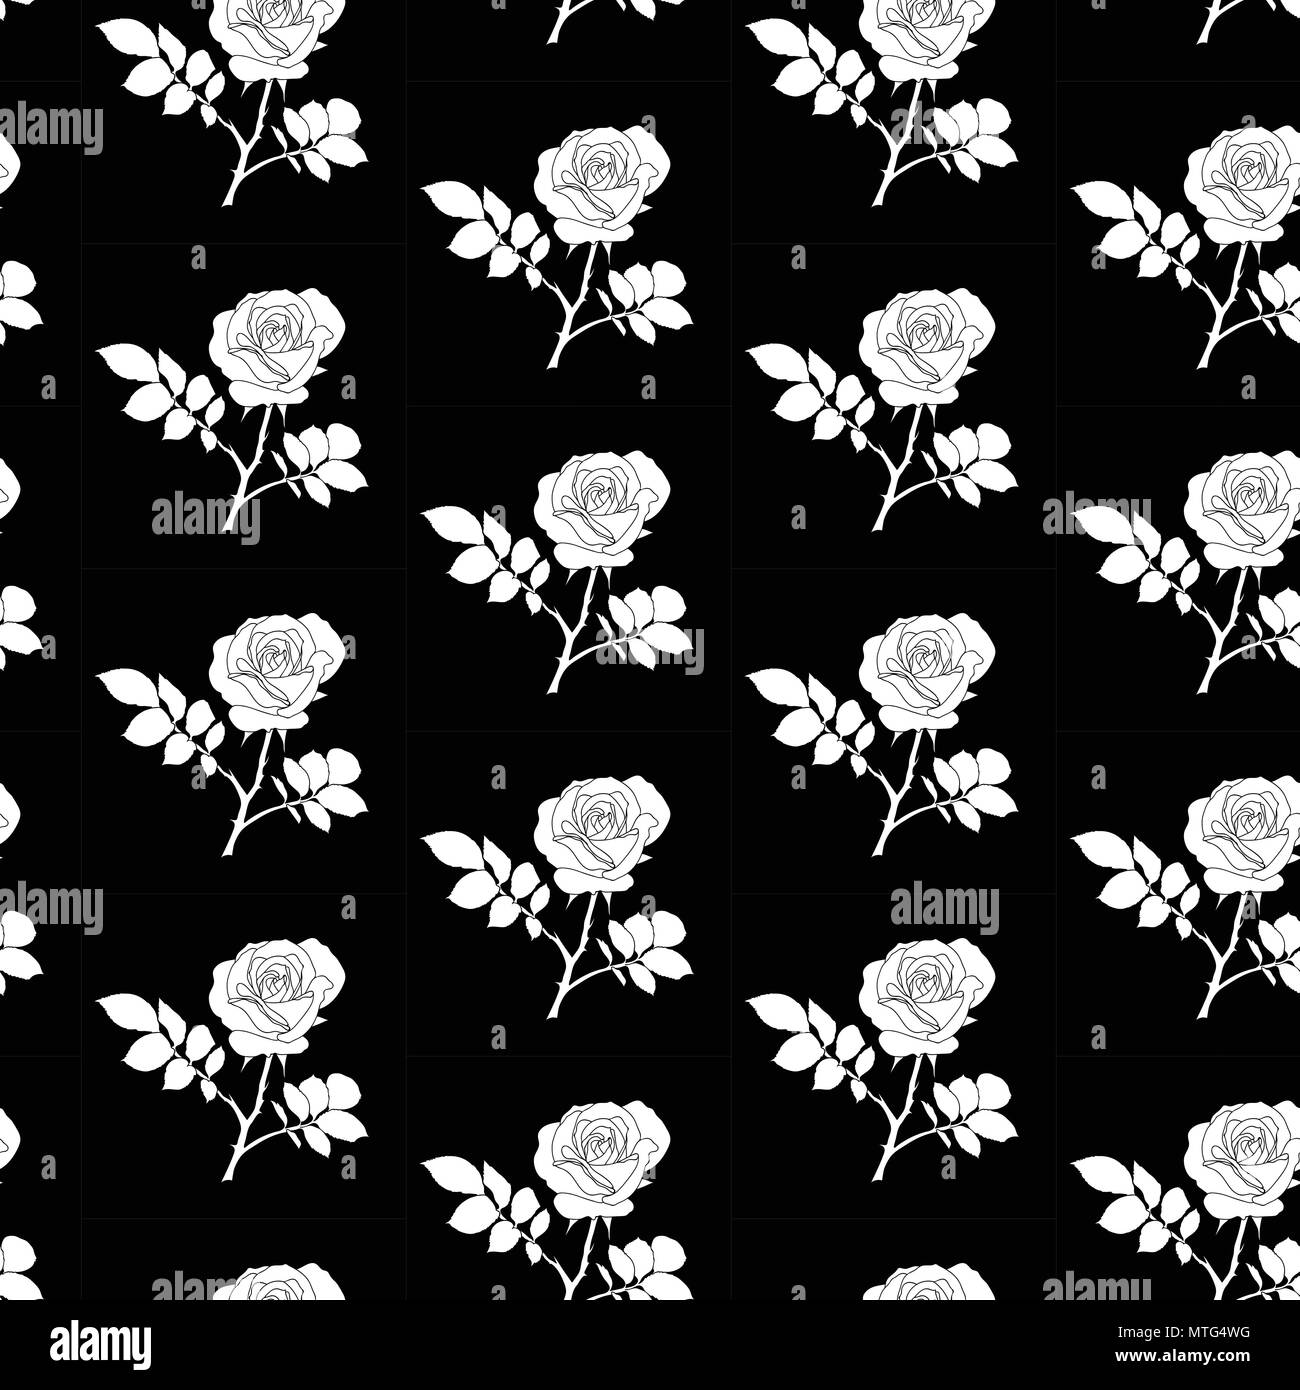 Roses seamless black and white geometric background - pattern for continuous replicate on black background. Can be used for fabric, wallpaper, printin Stock Vector